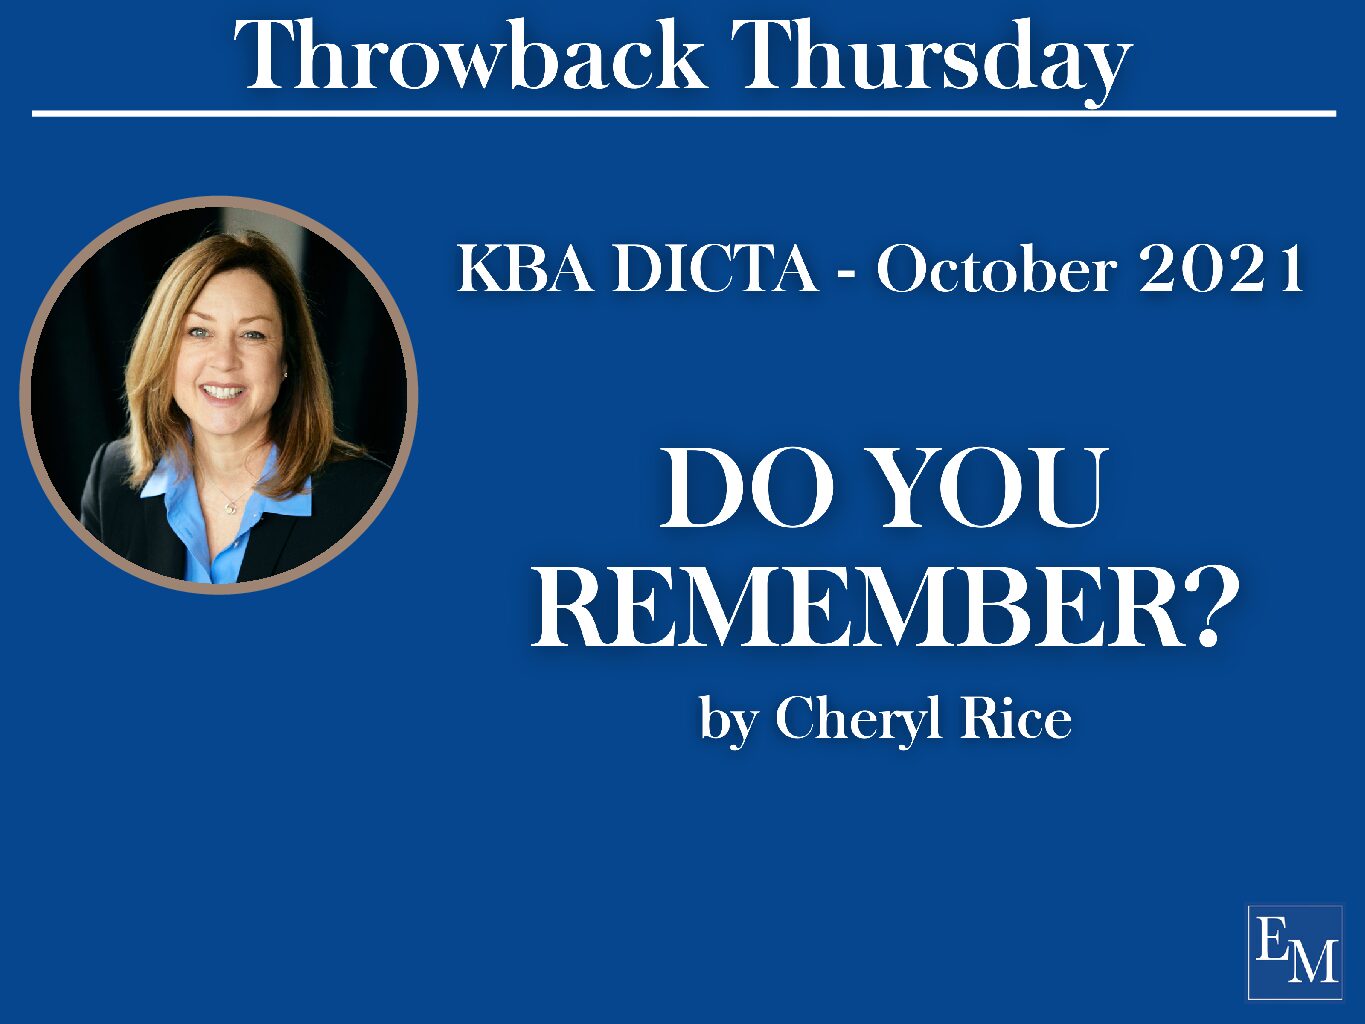 Throwback Thursday – DO YOU REMEMBER by Cheryl Rice